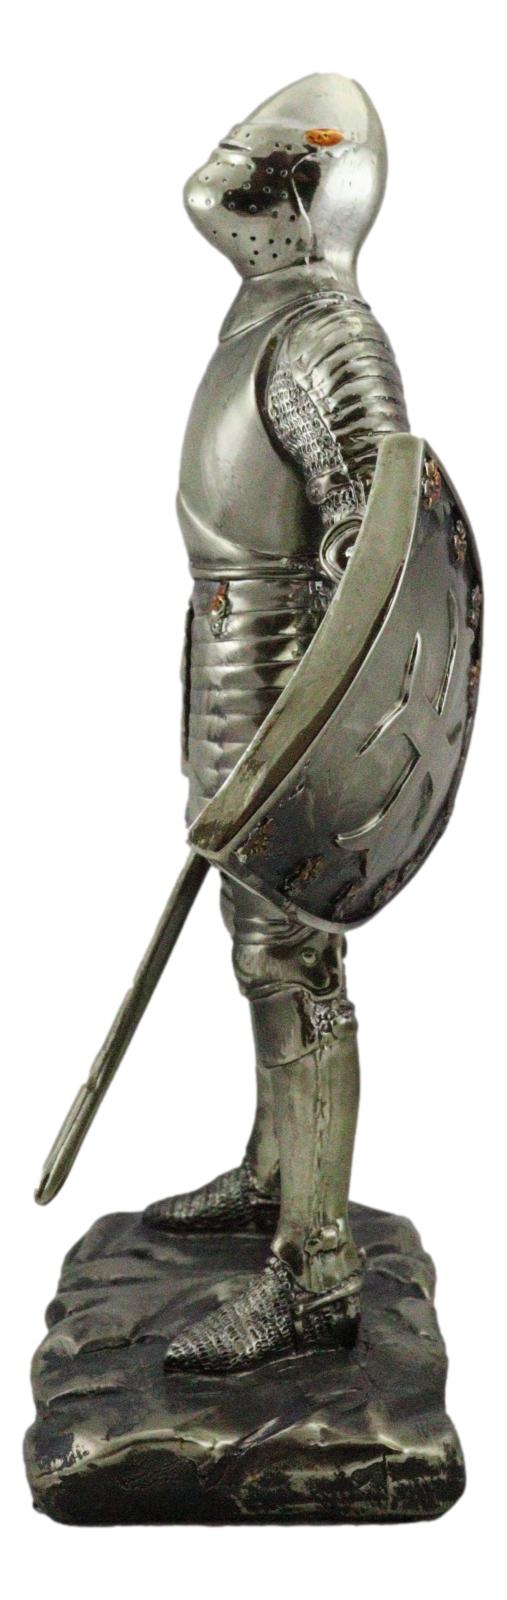 Ebros Holy Roman Empire Crusader Knight with Sword and Shield 7" Tall Figurine